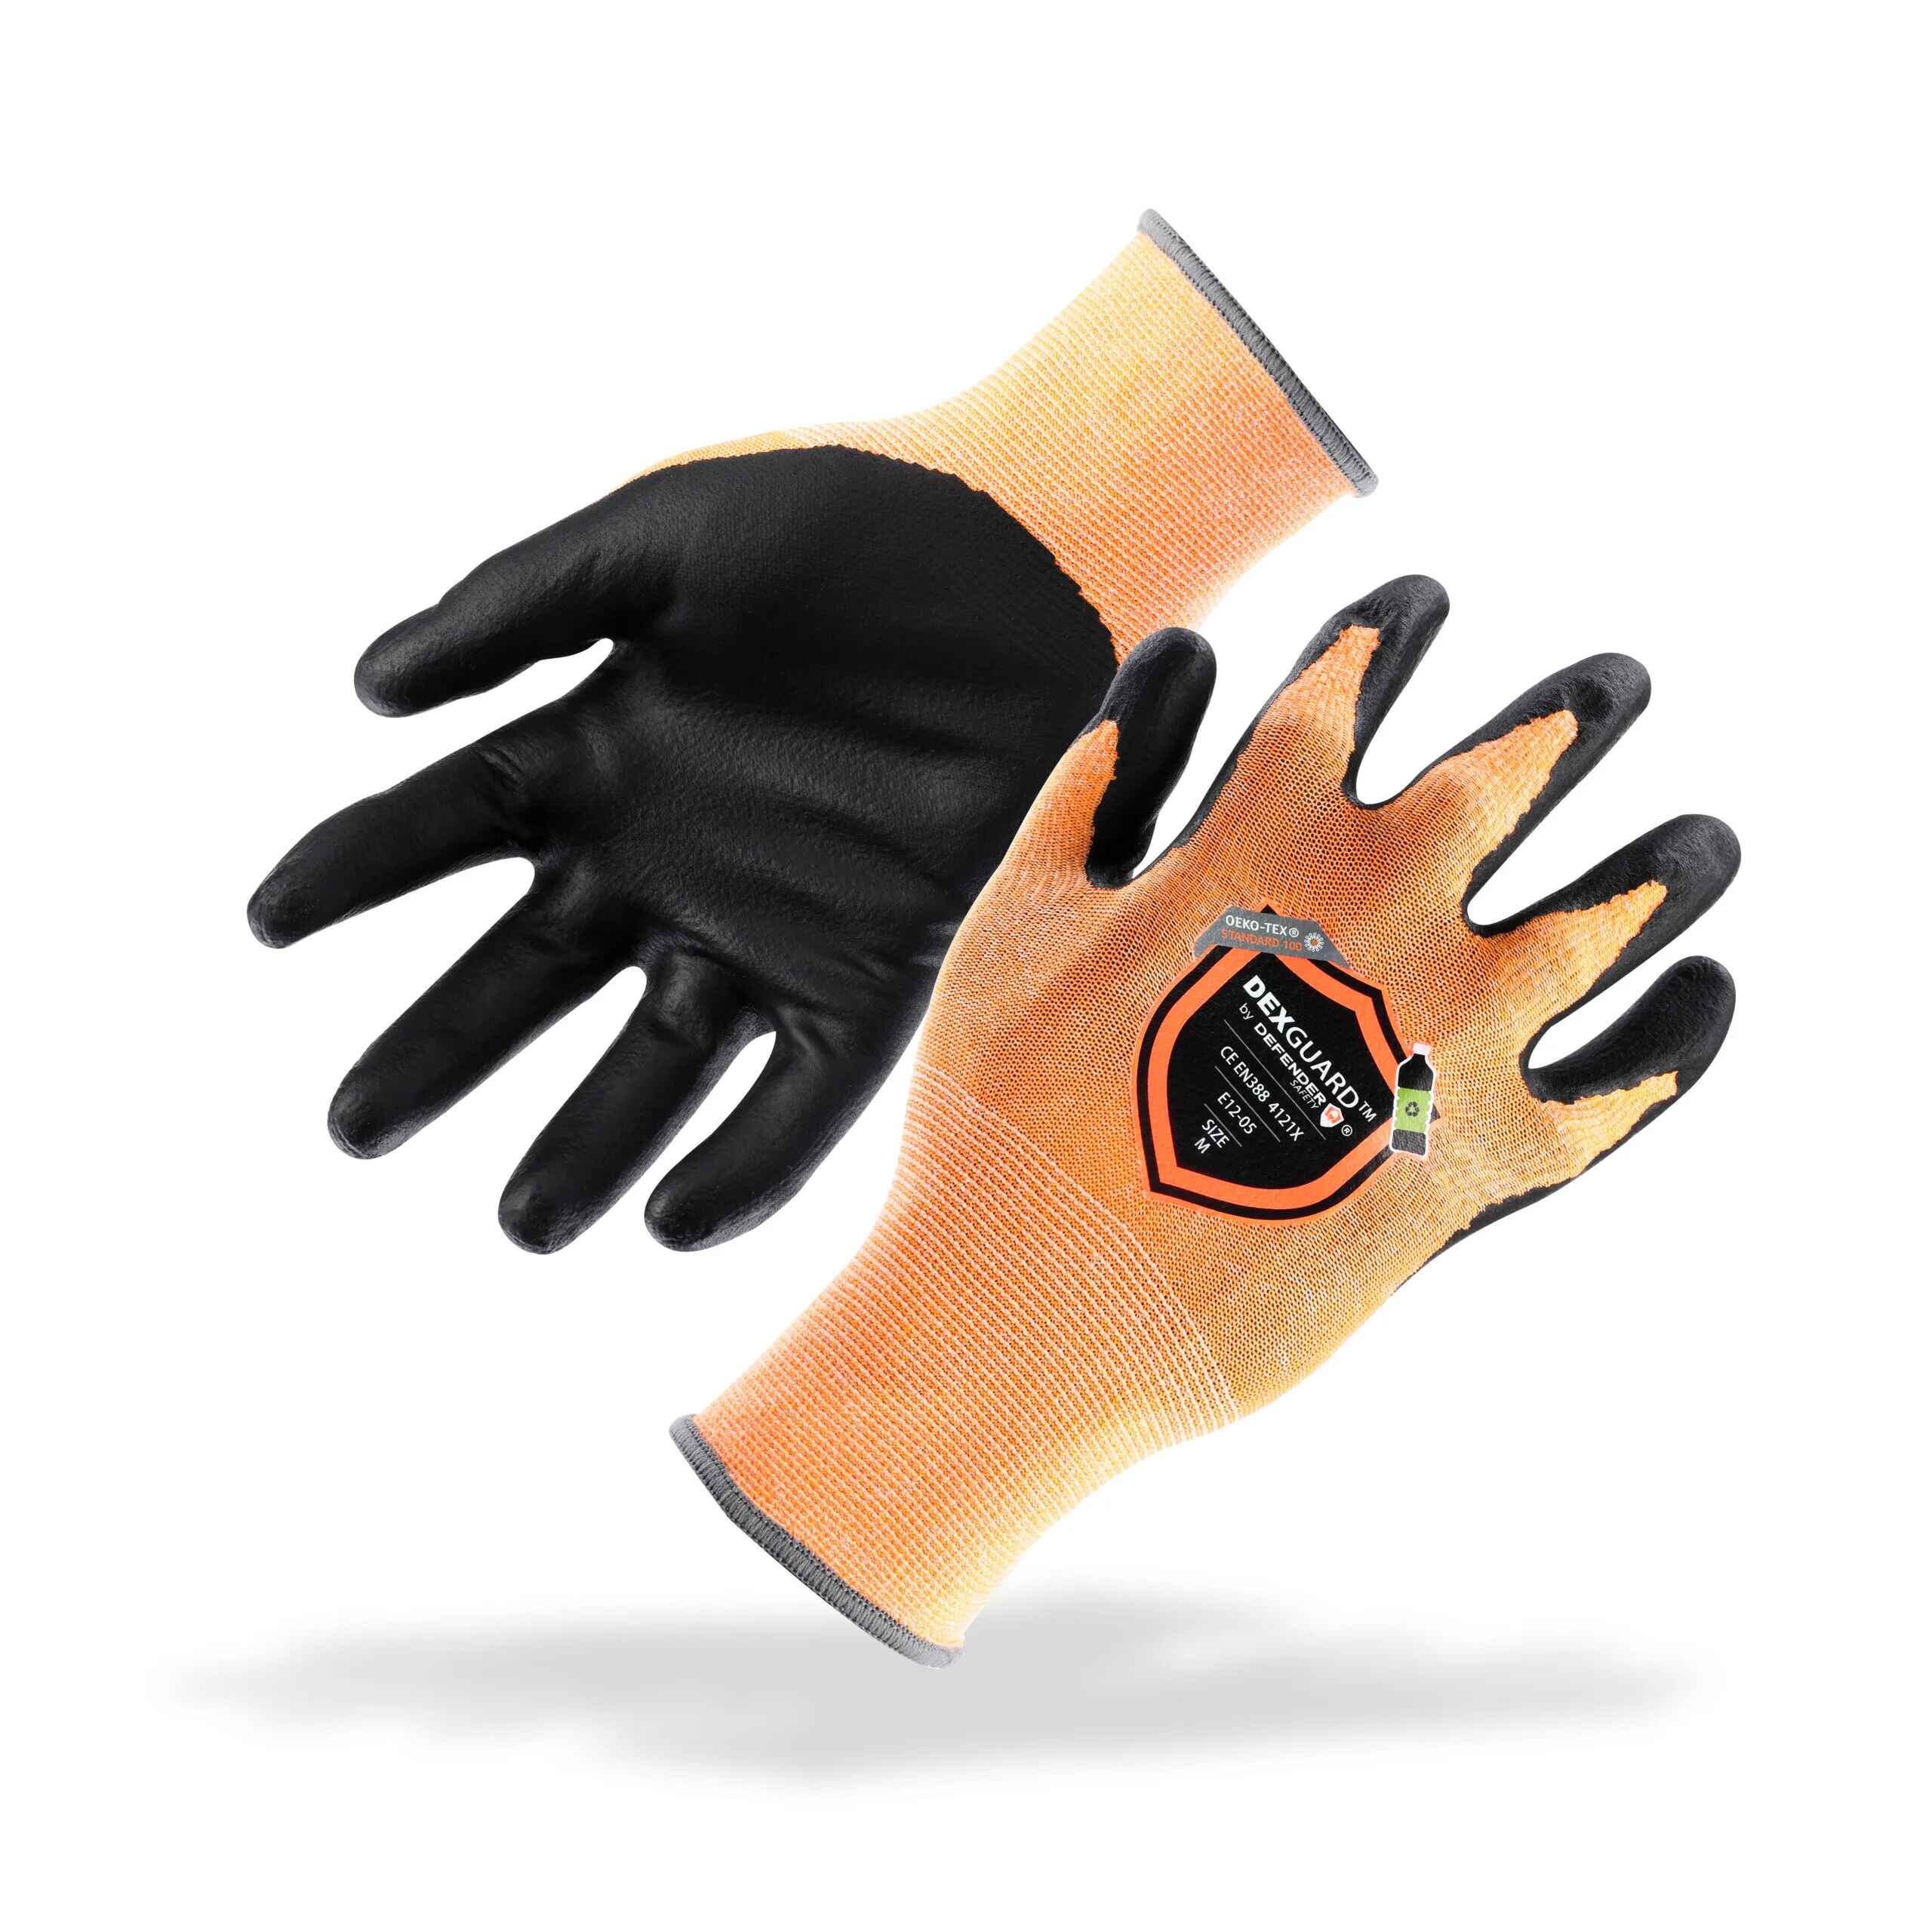 https://cdn.shopify.com/s/files/1/0786/4523/1934/products/dexguard-general-purpose-recycled-gloves-touch-screen-compatible-abrasion-resistant-level-4-foam-nitrile-coating-139196.jpg?v=1690825175&width=2560